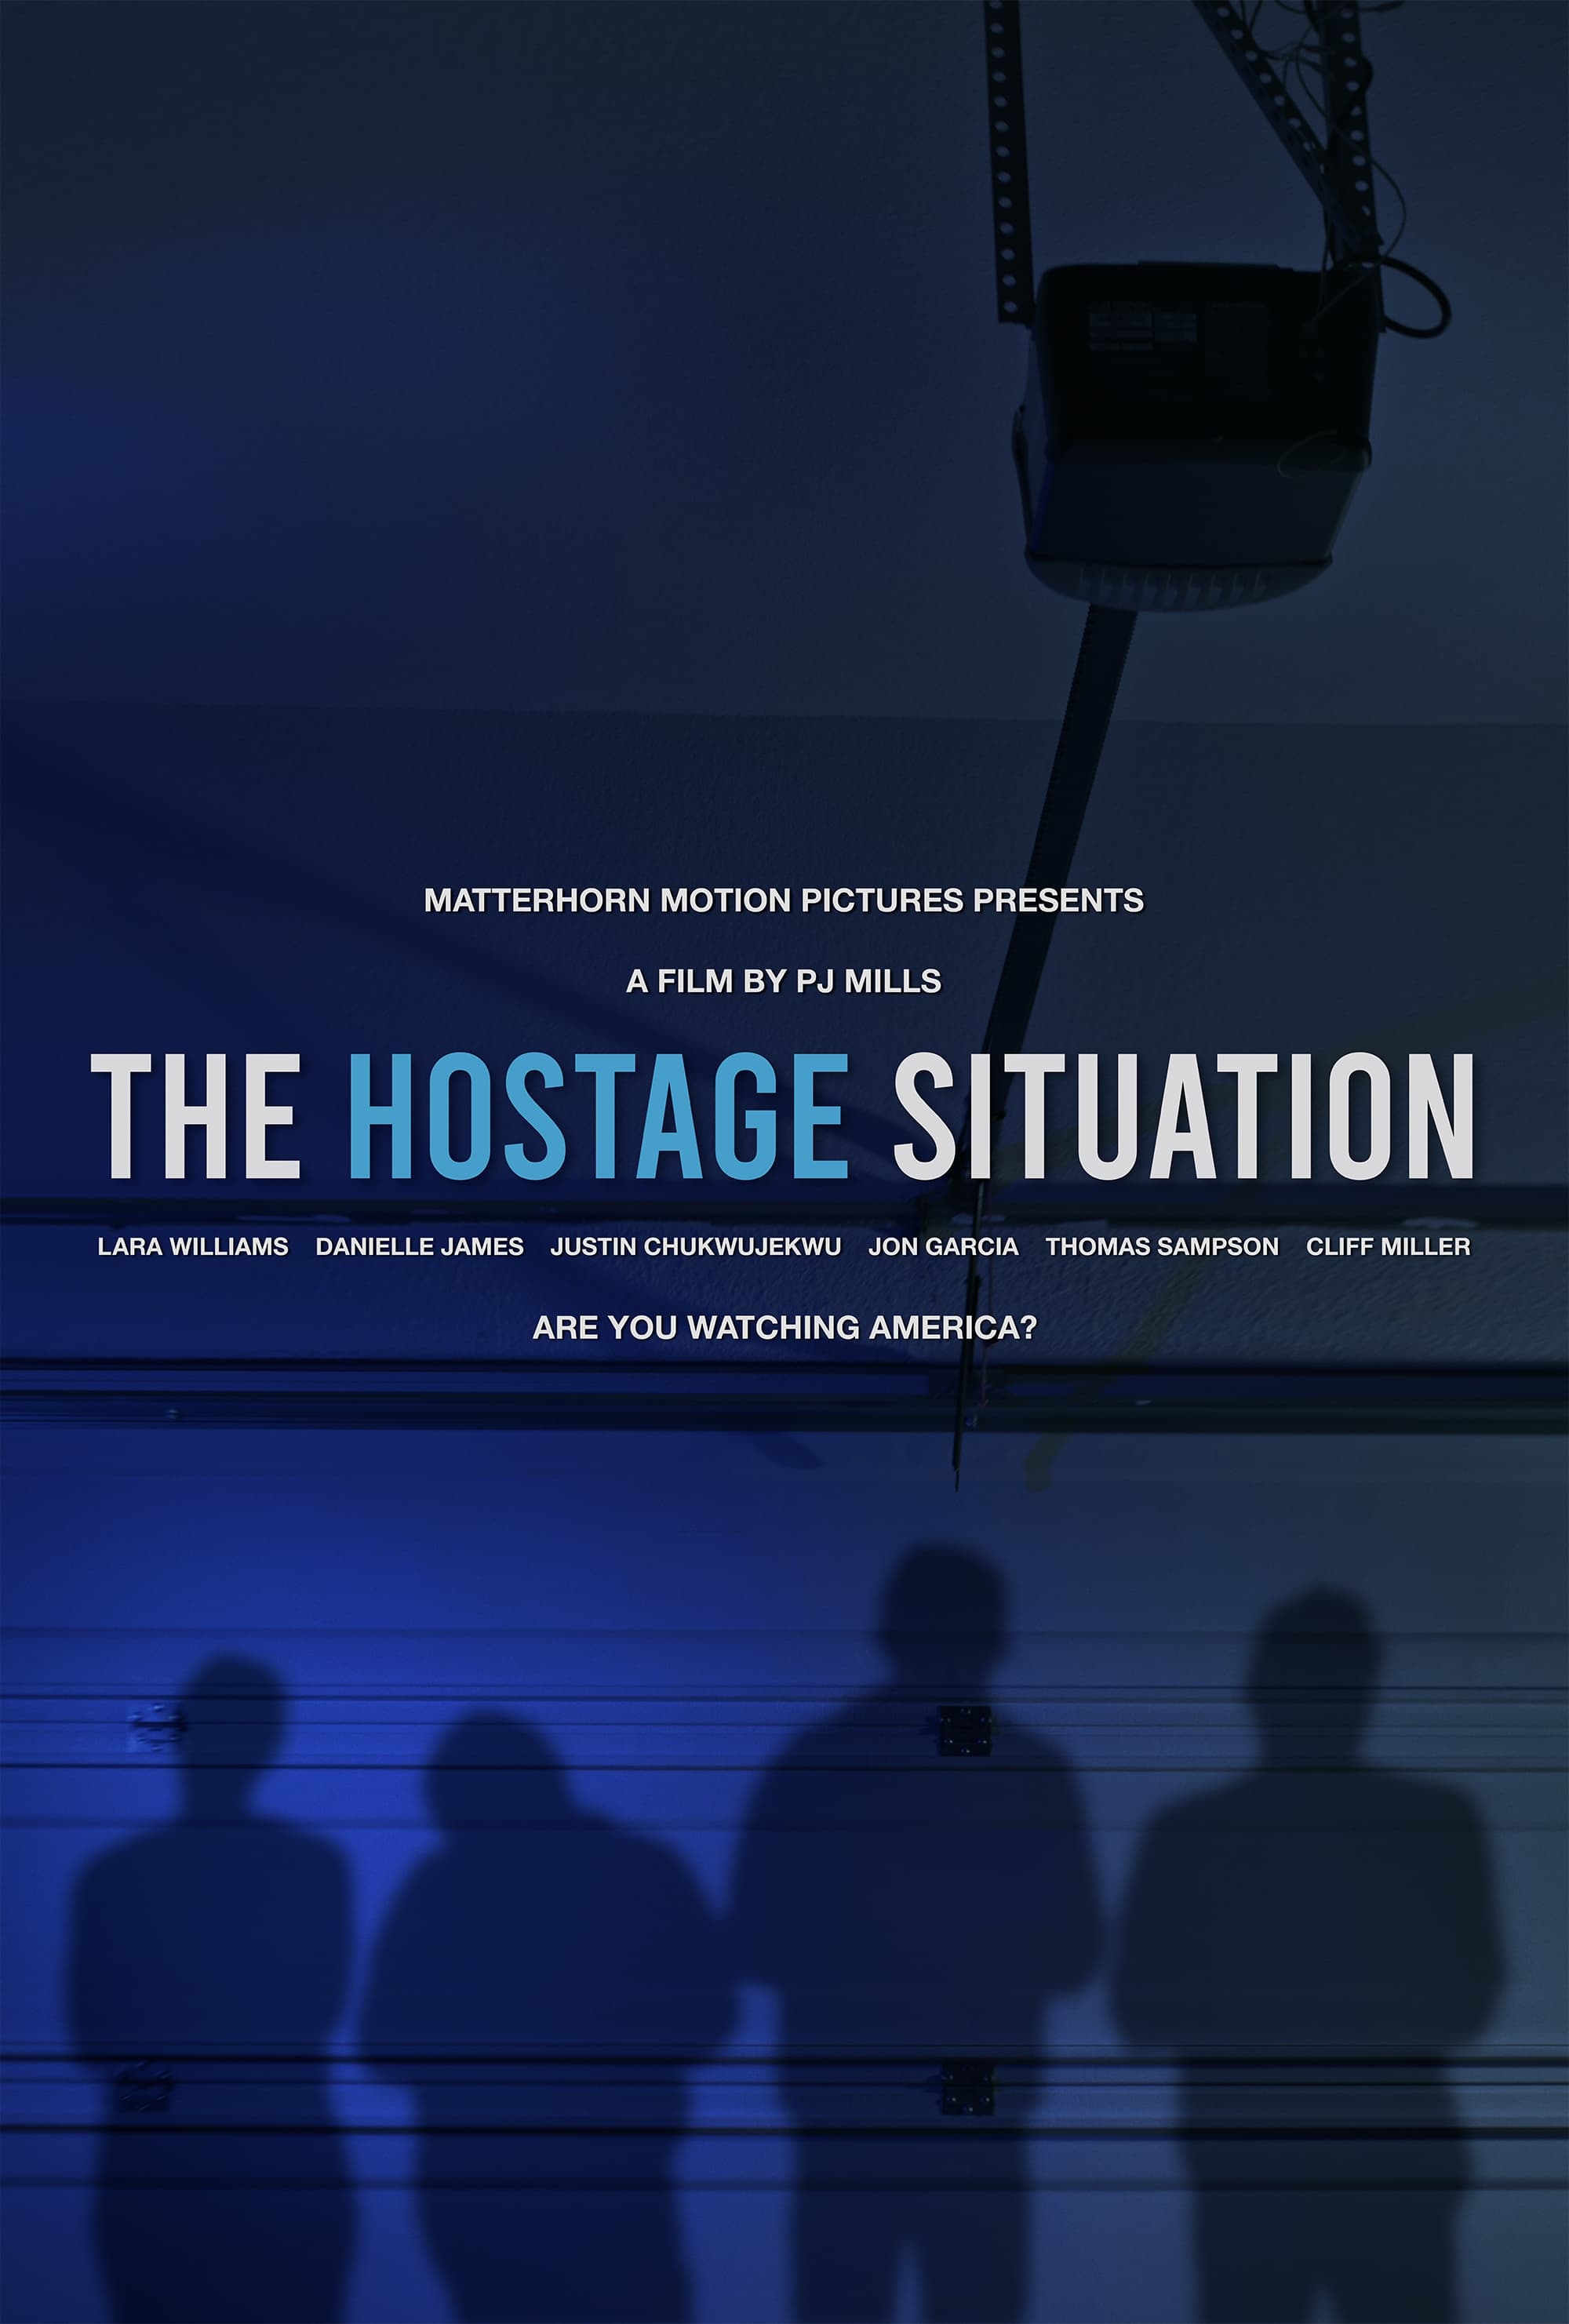 The Hostage Situation